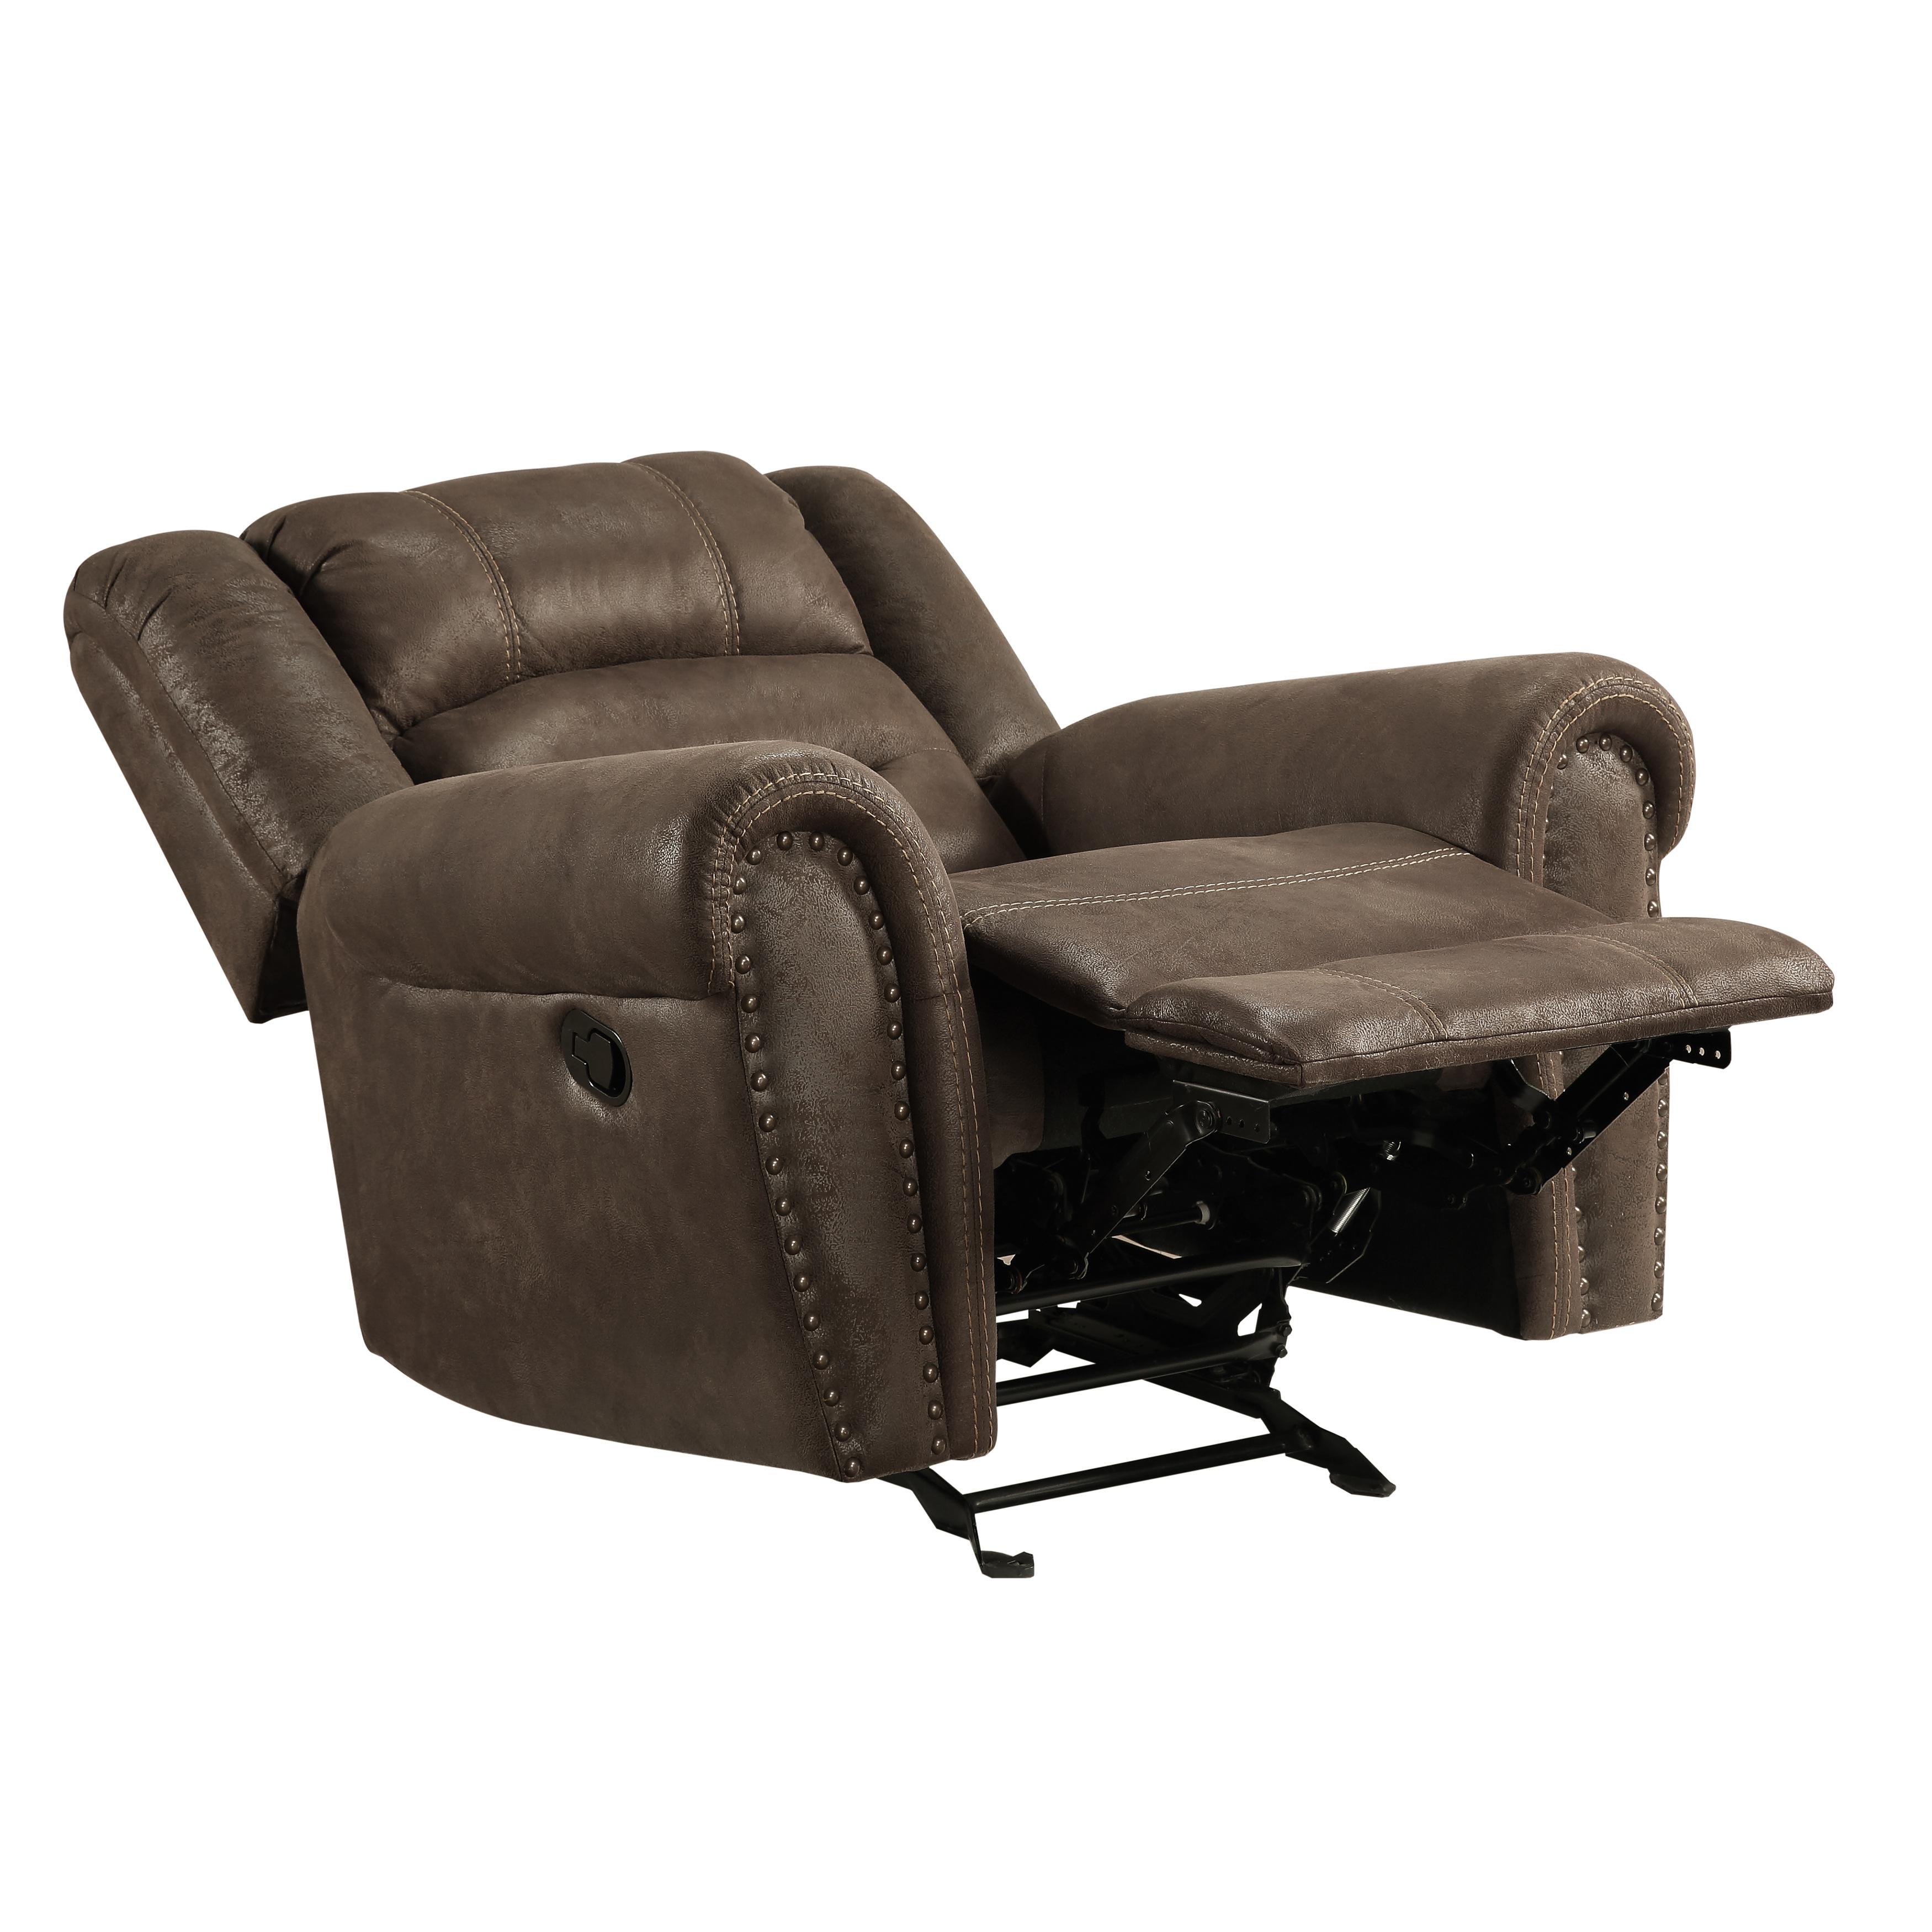 

    
Homelegance 9467BR-1 Creighton Reclining Chair Brown 9467BR-1
